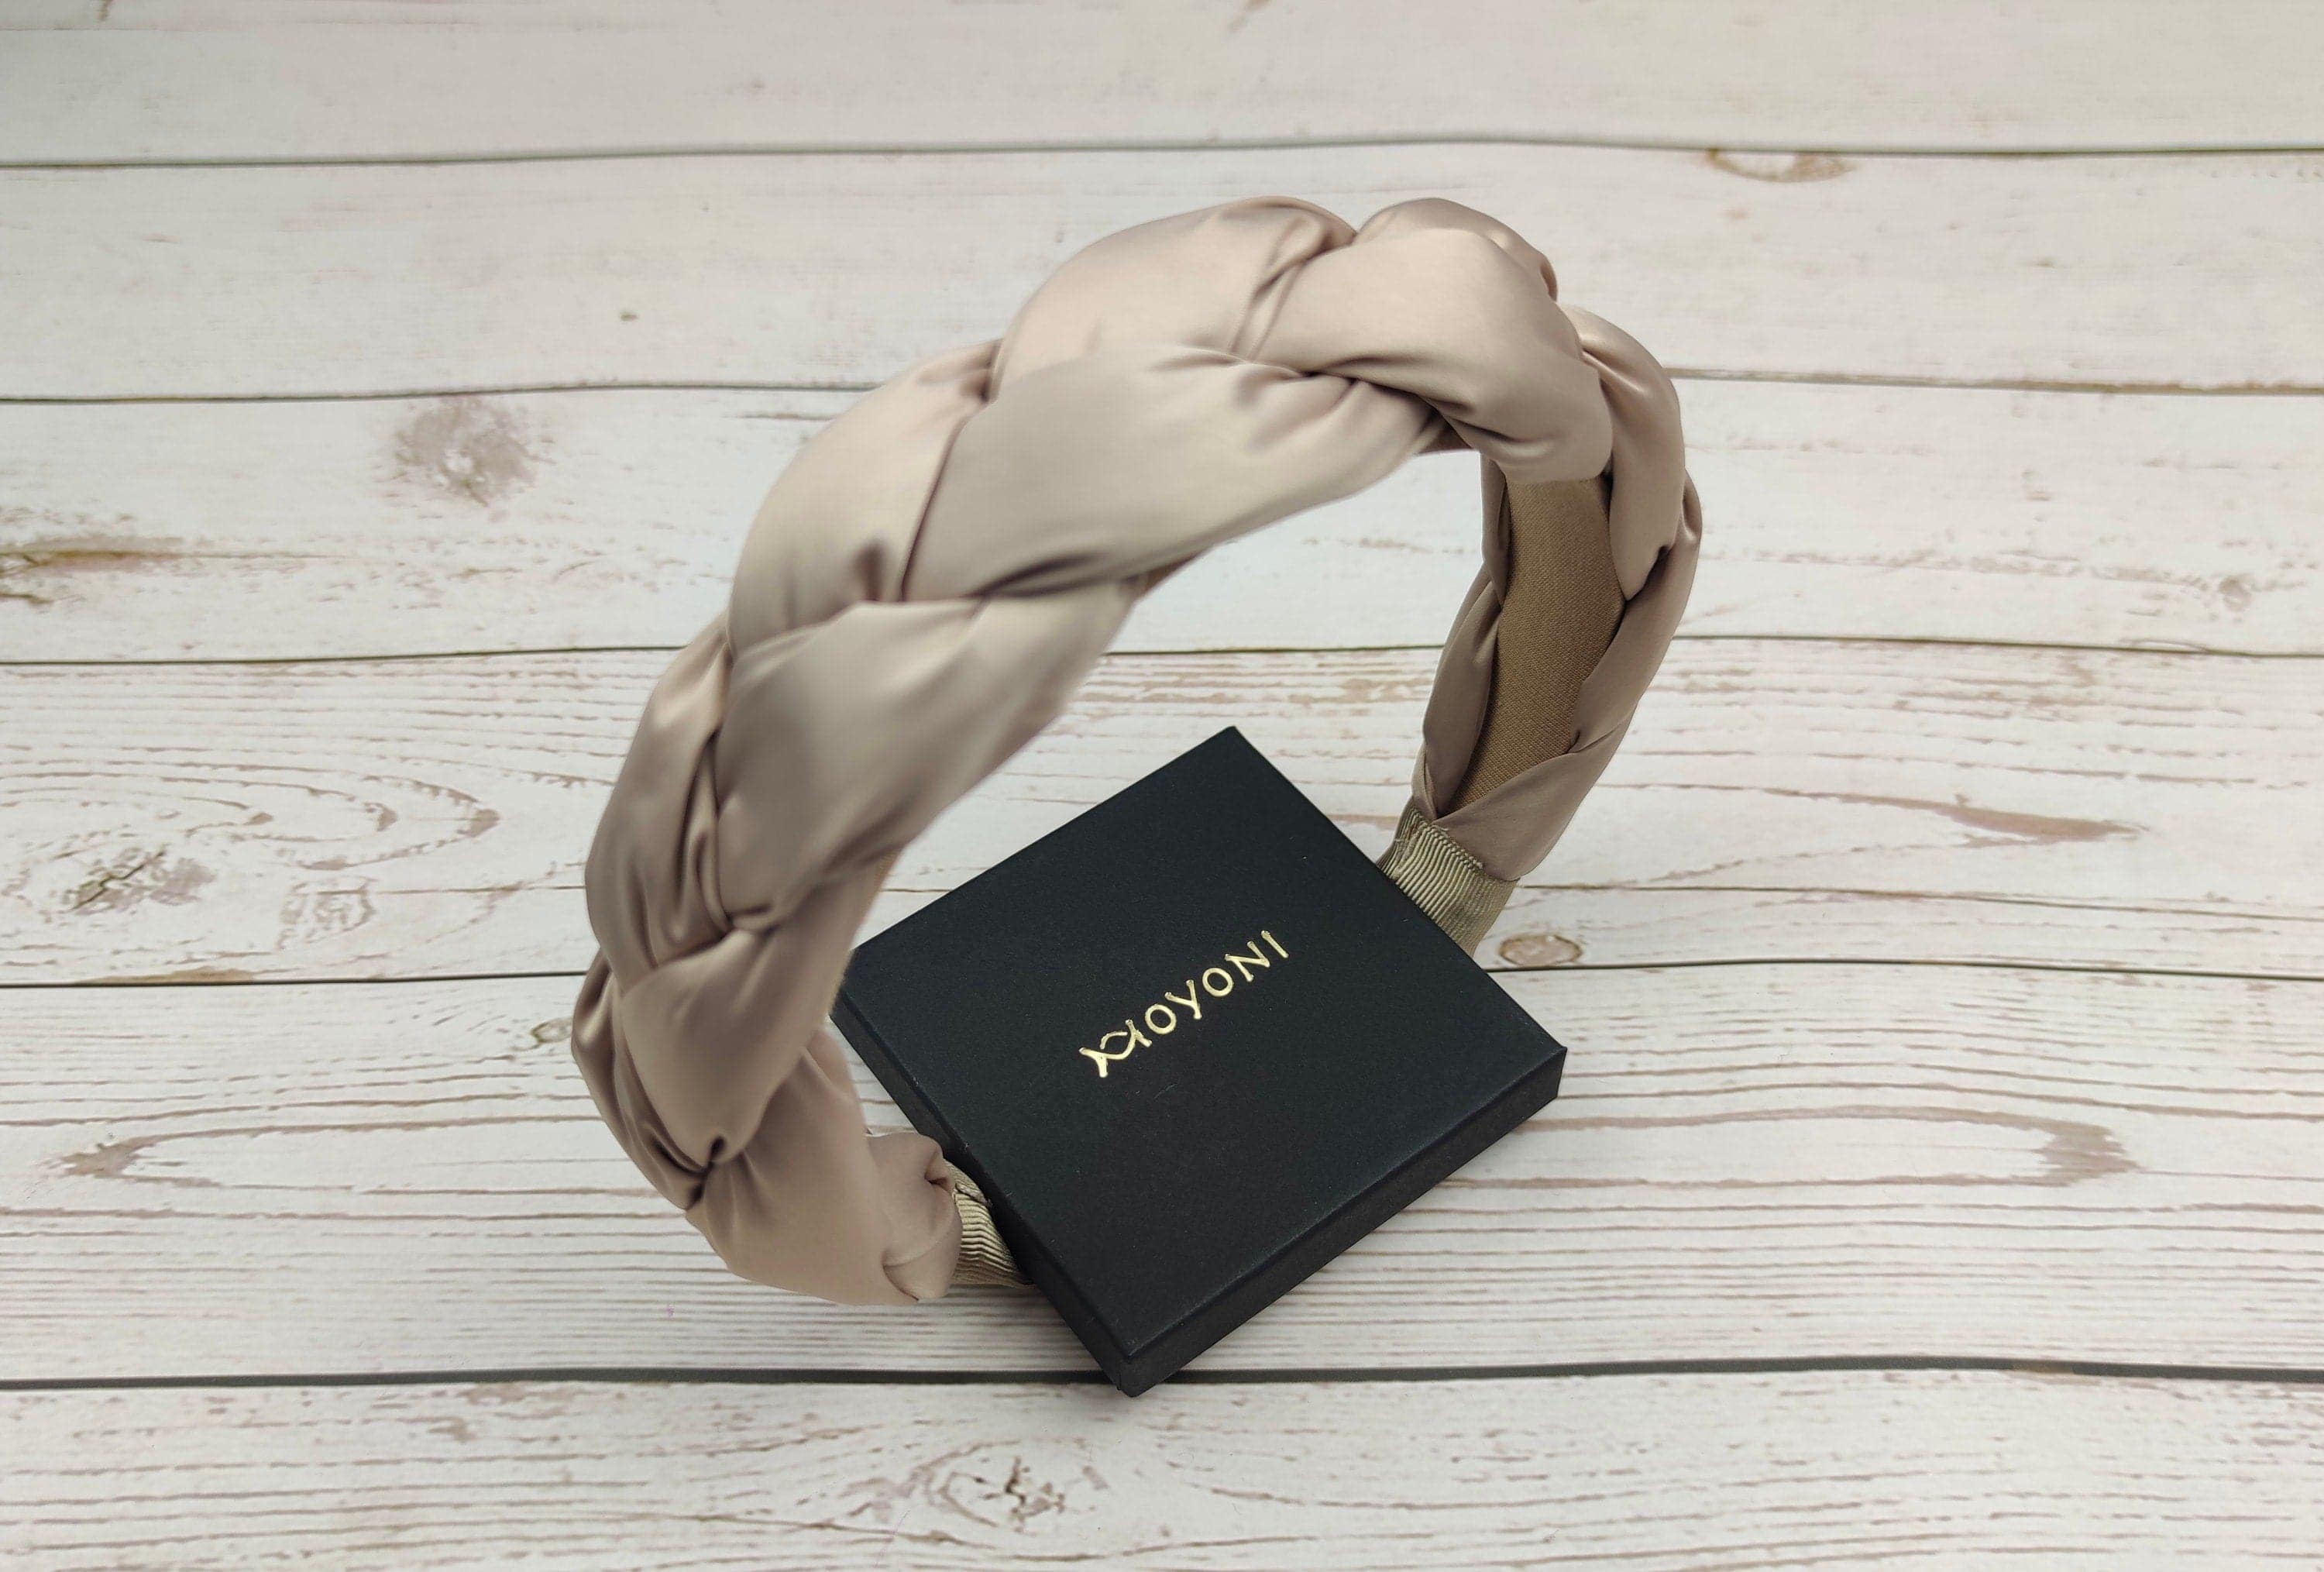 The perfect accessory for any summer outfit - a stylish beige satin headband for women.